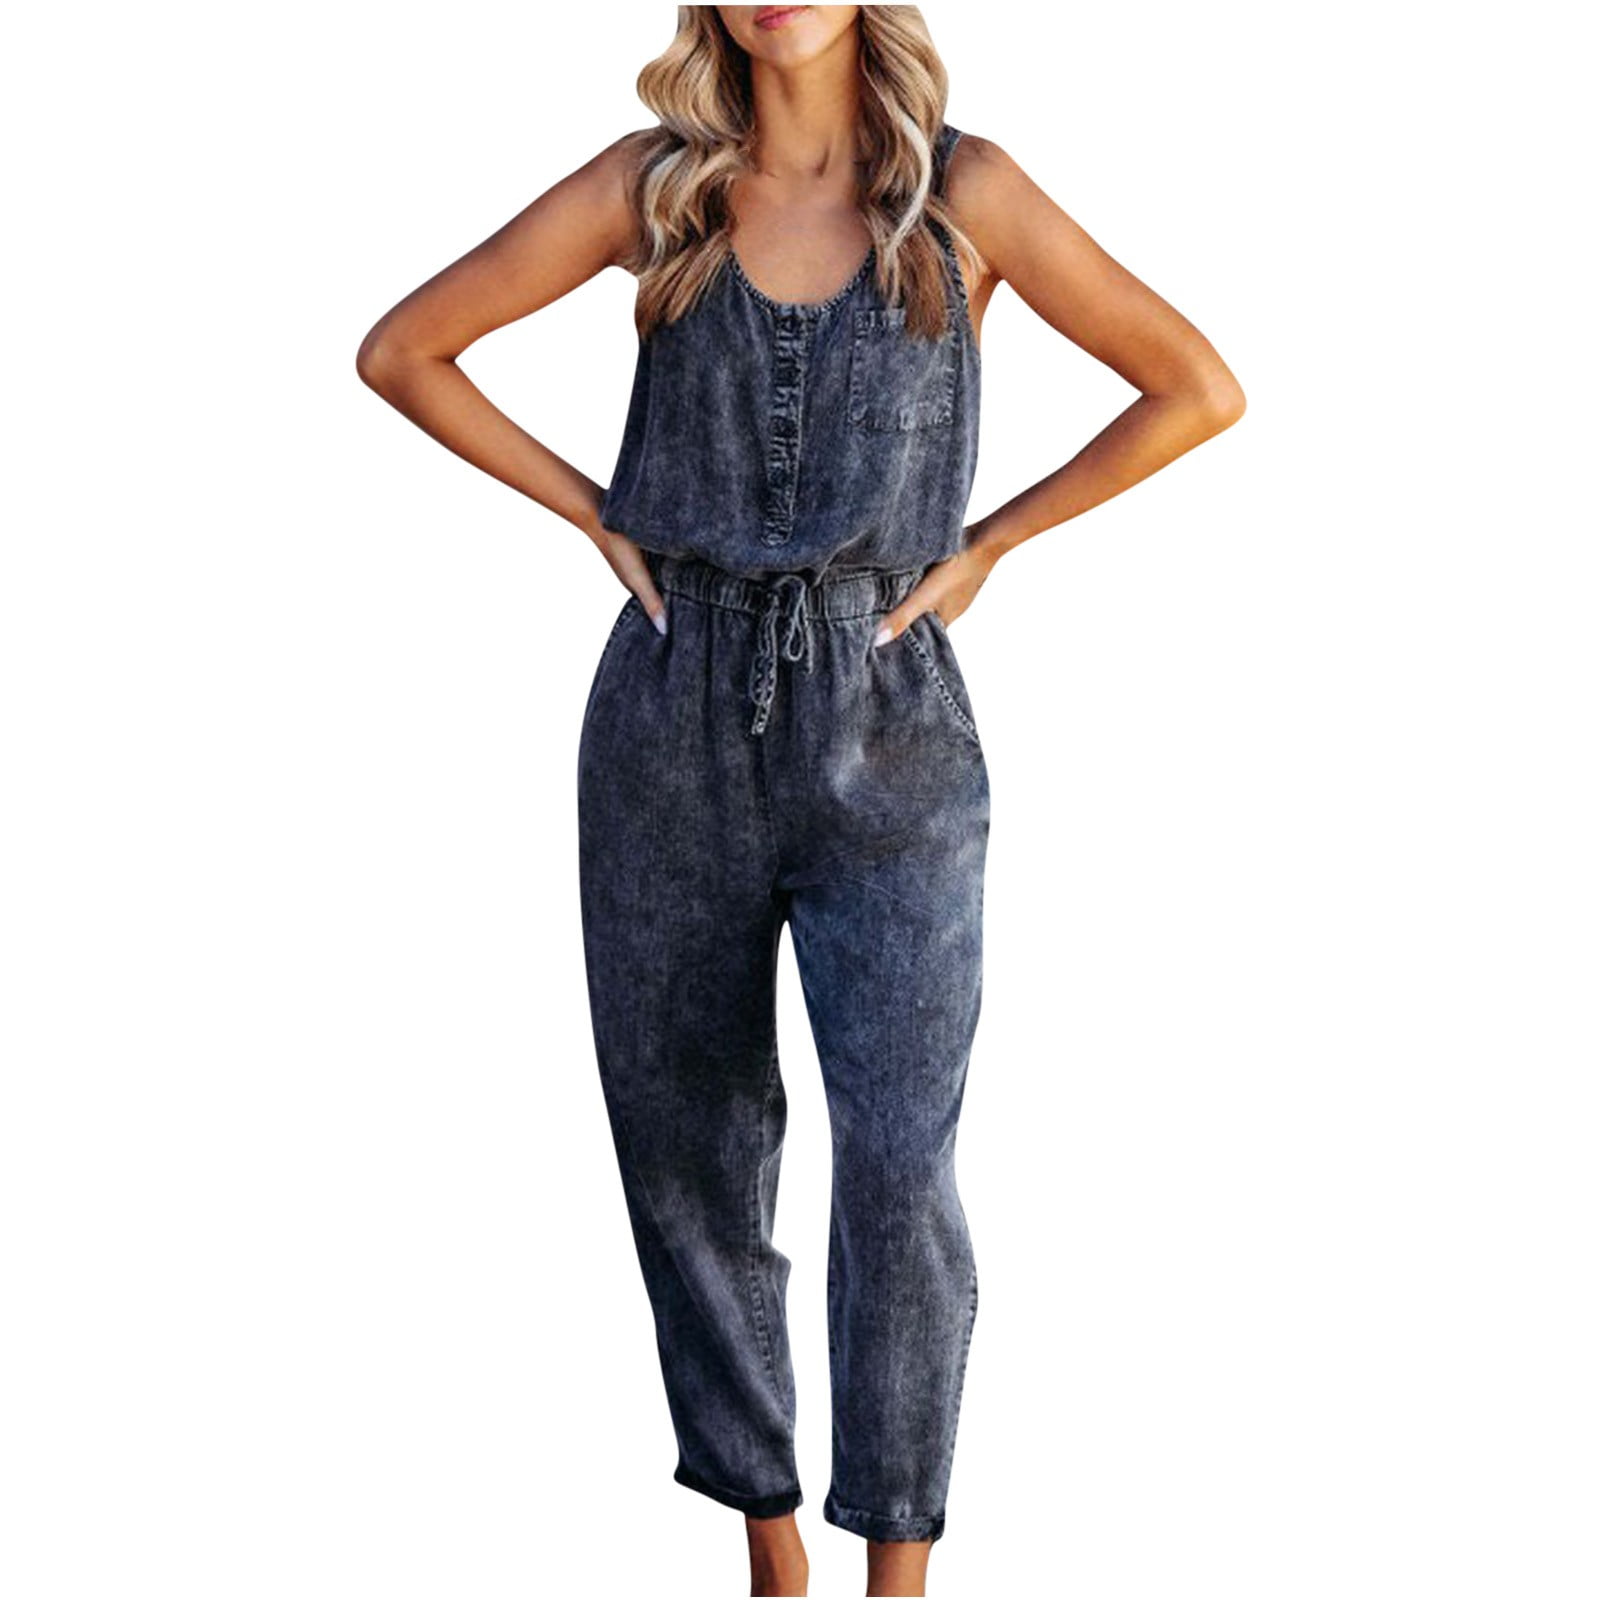 JWZUY Women Sleeveless Summer Casual Button Up Sccop Belted Waist Leg Pant Jumpsuits Jeans Rompers with Pockets 1-Black Small -